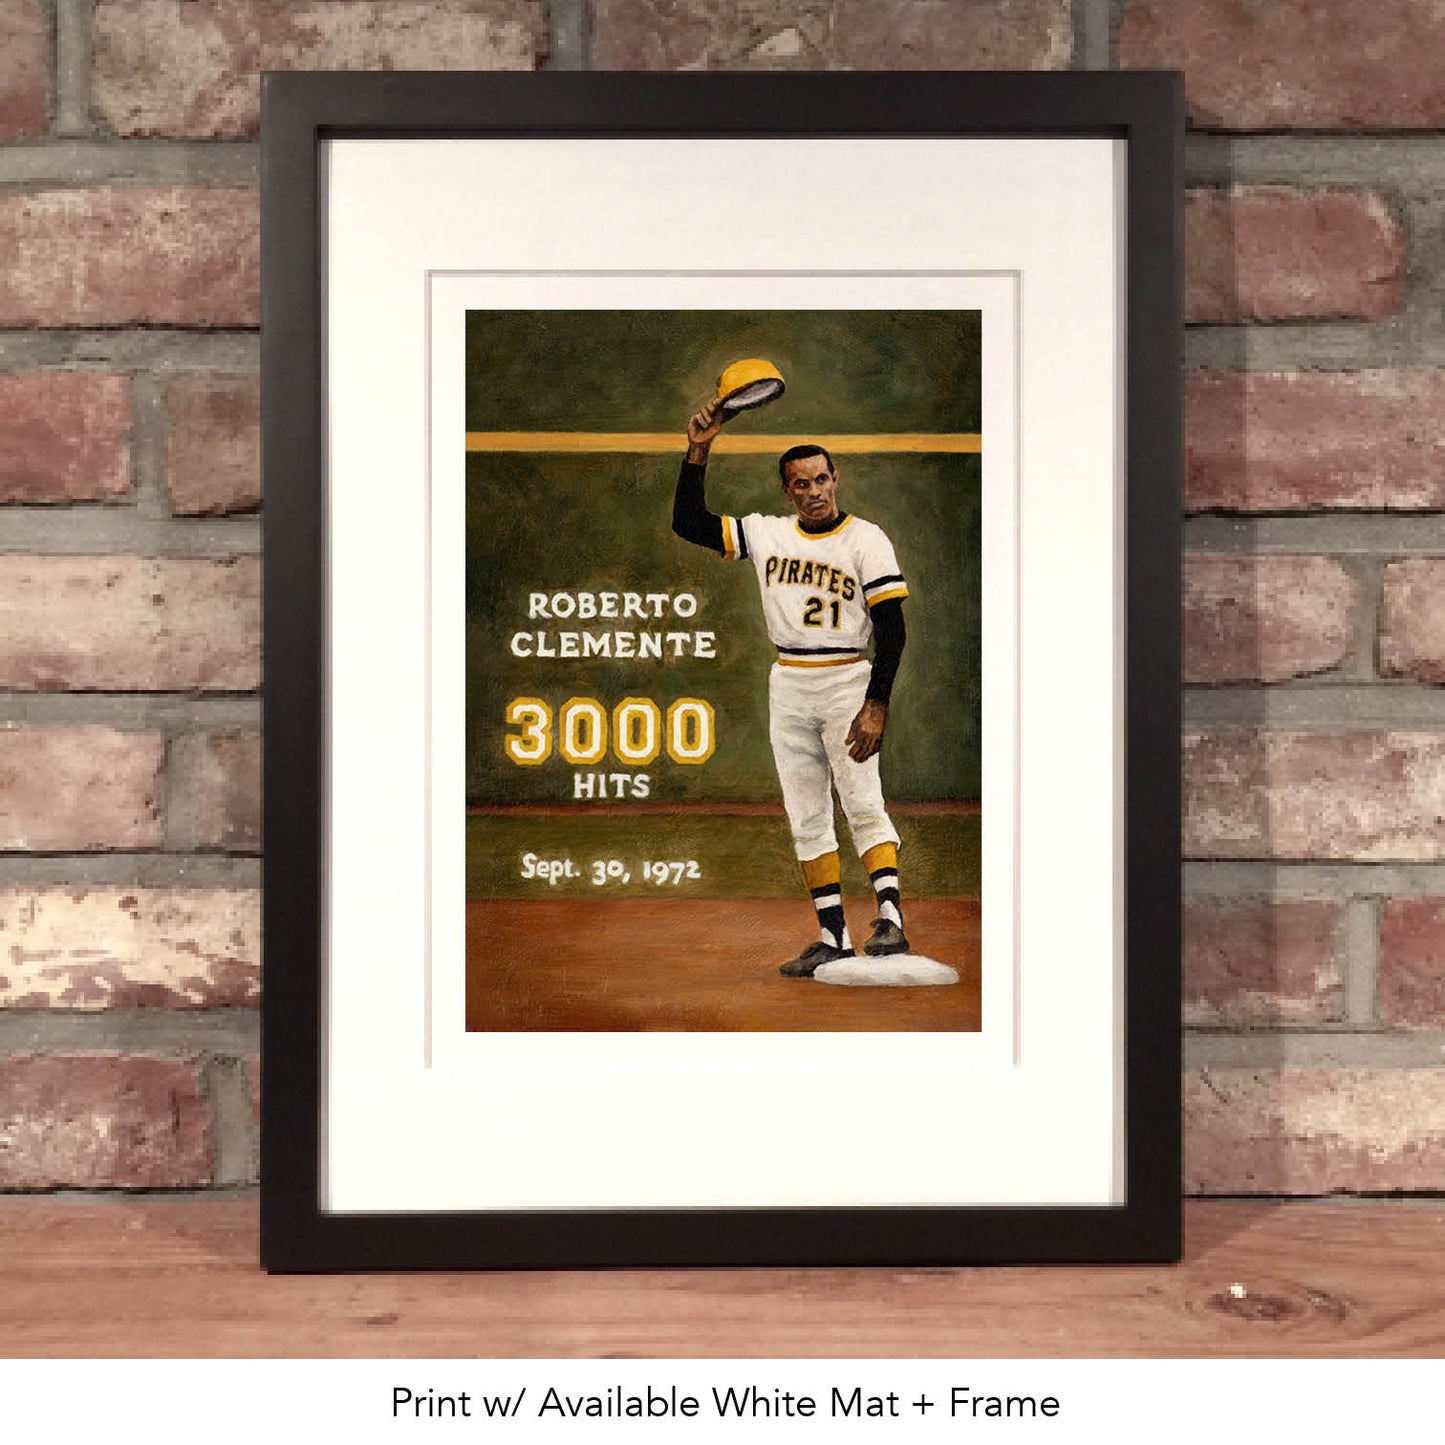 ROBERTO CLEMENTE - 3000 HITS // Oil Painting [Pittsburgh Pirates]